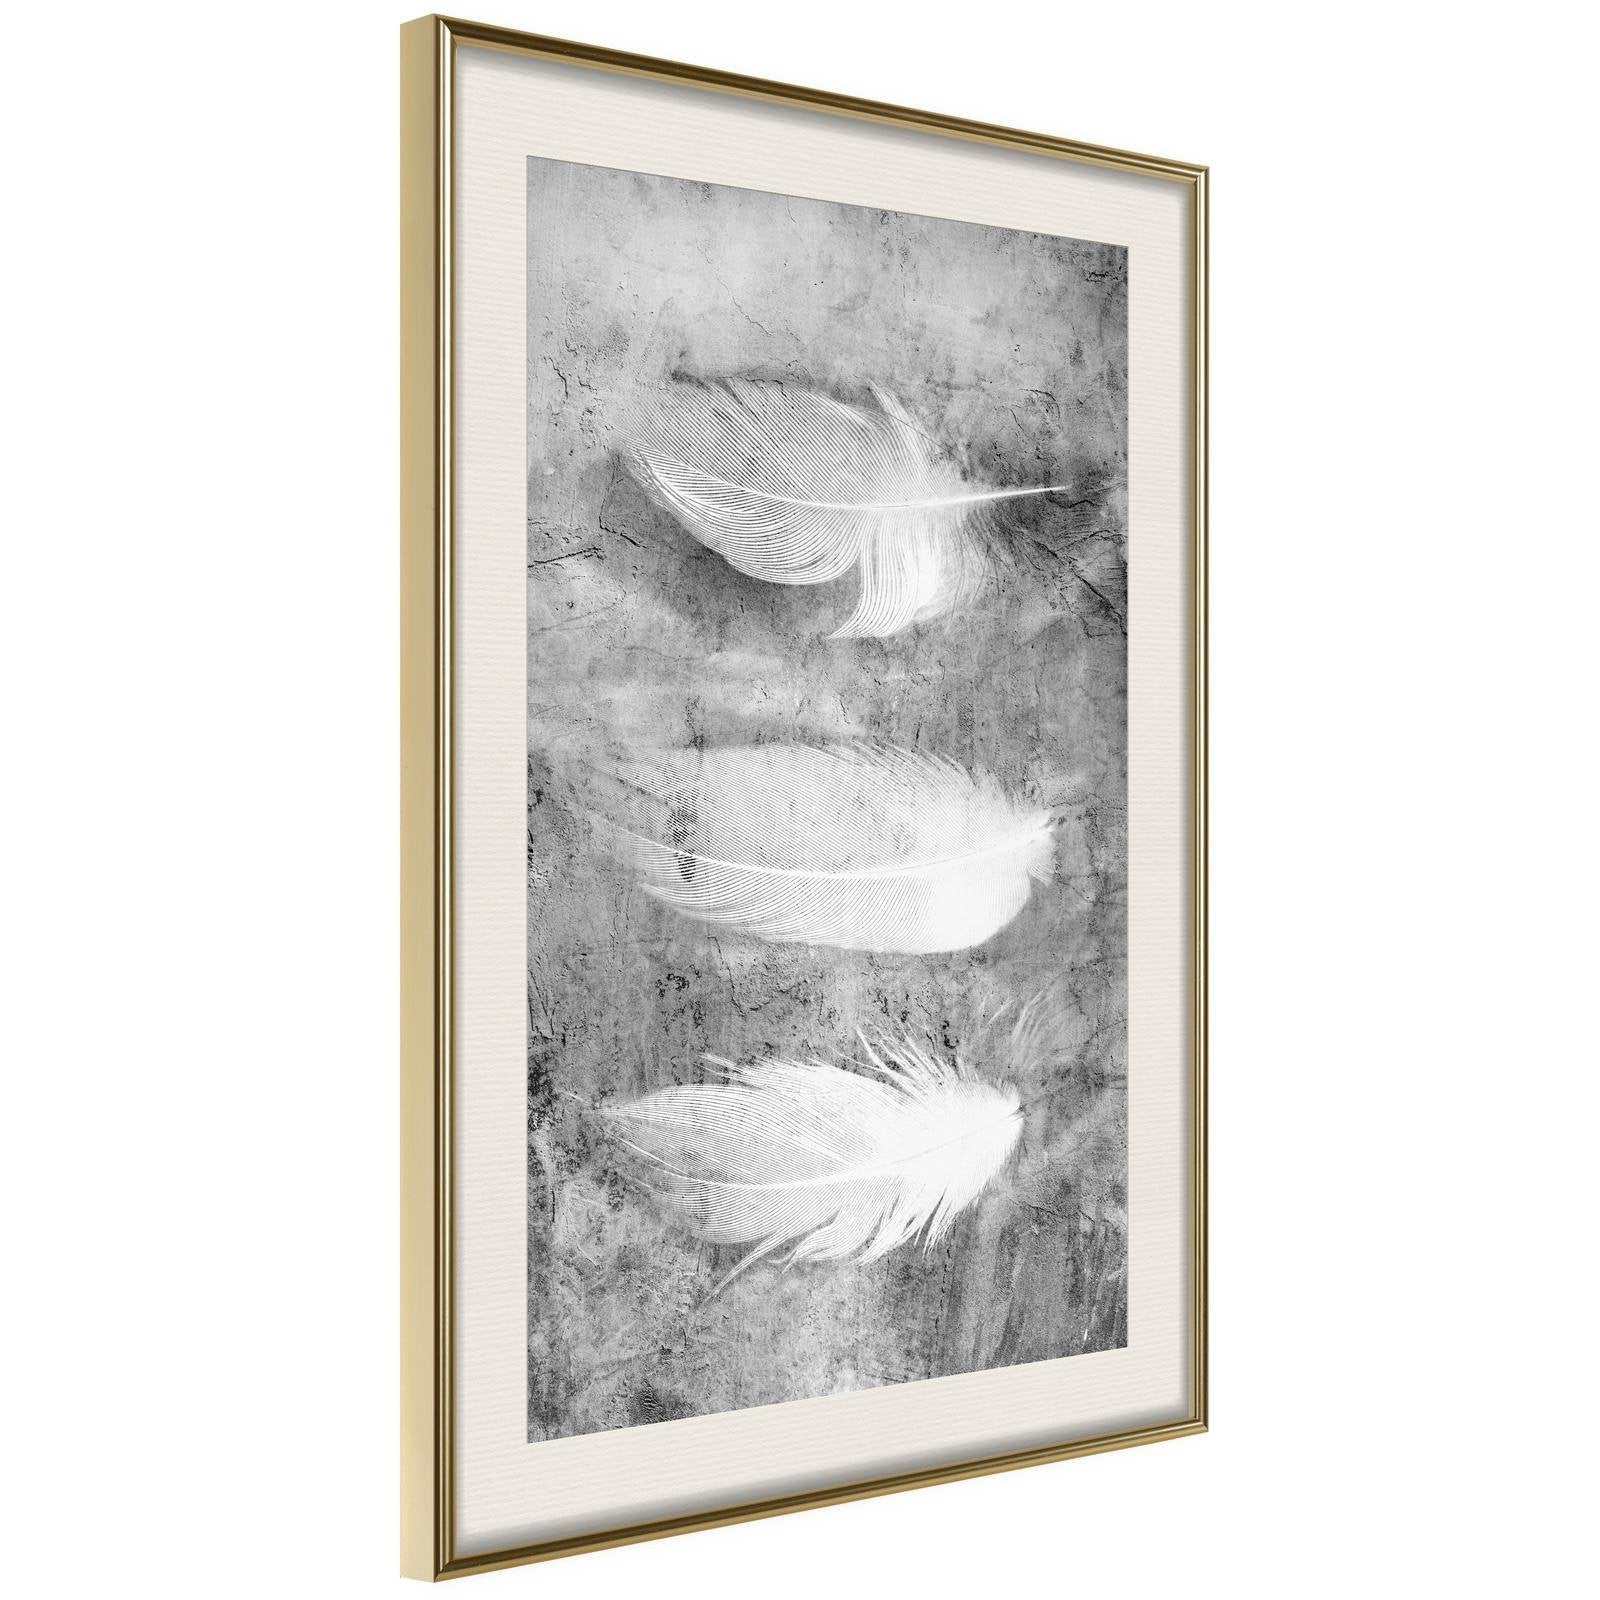 Inramad Poster / Tavla - Delicate Feathers-Poster Inramad-Artgeist-20x30-Guldram med passepartout-peaceofhome.se